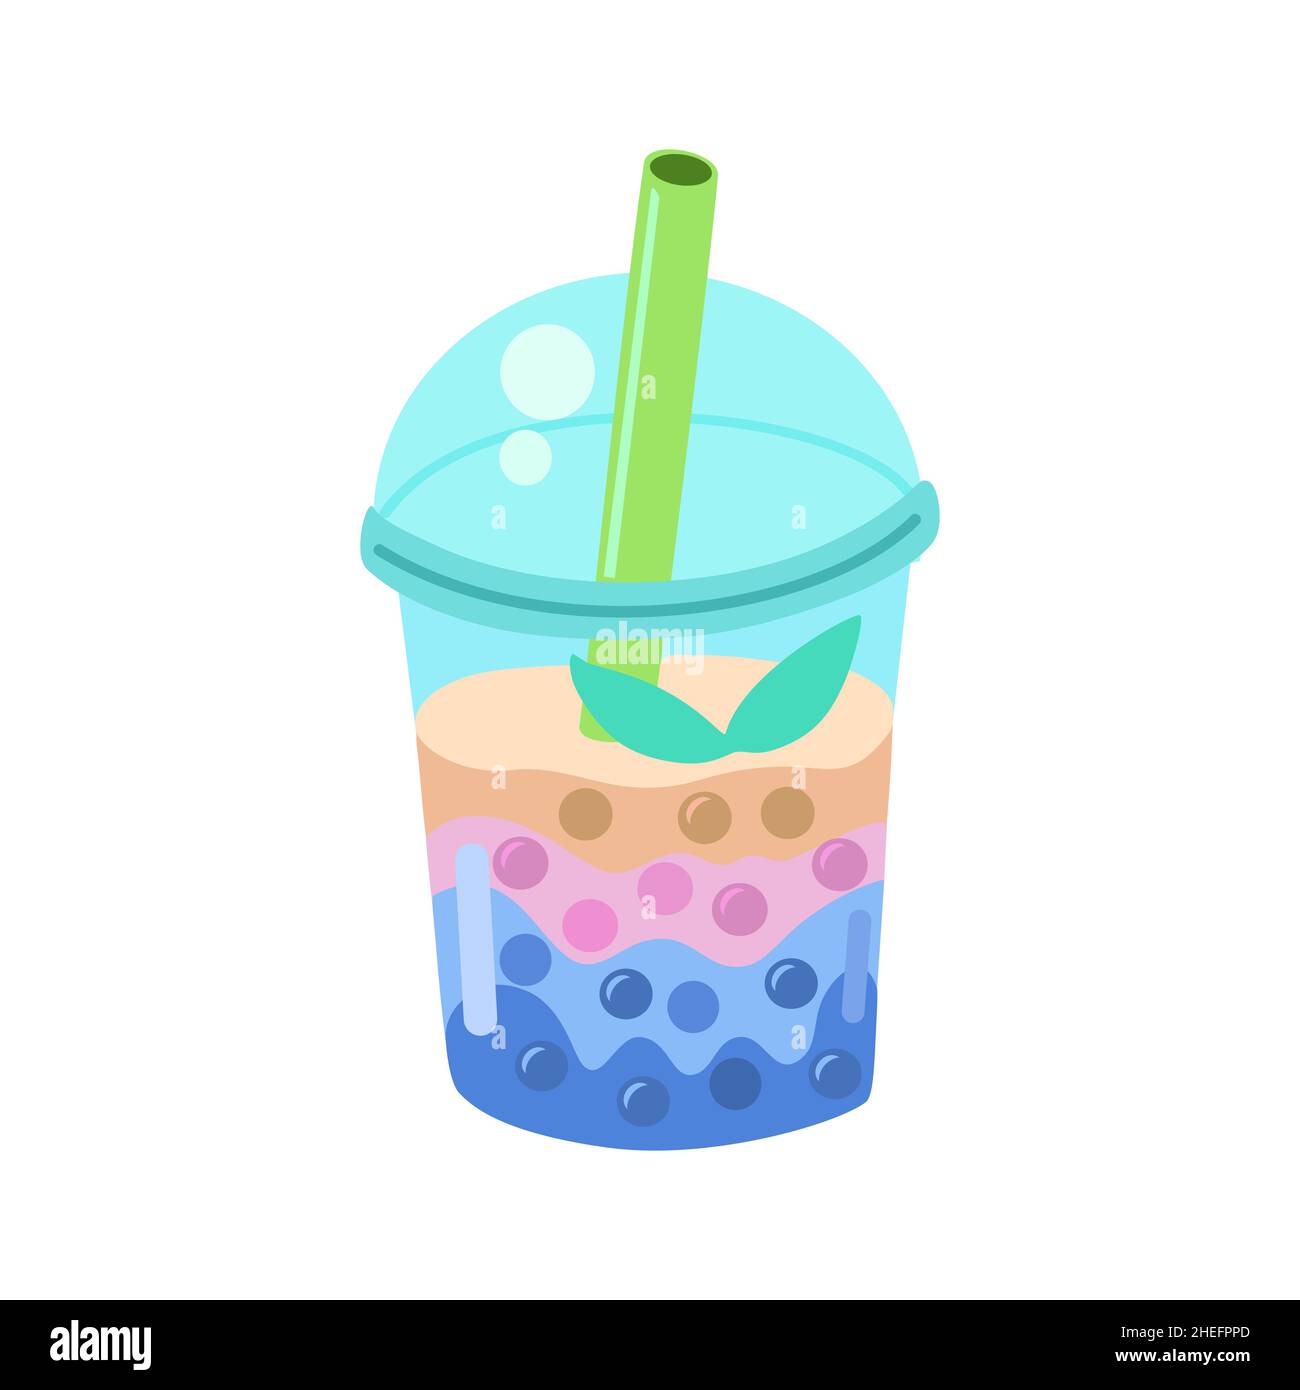 https://c8.alamy.com/comp/2HEFPPD/bubble-tea-cup-isolated-on-white-background-cartoon-glass-with-milk-shake-asian-food-desert-2HEFPPD.jpg